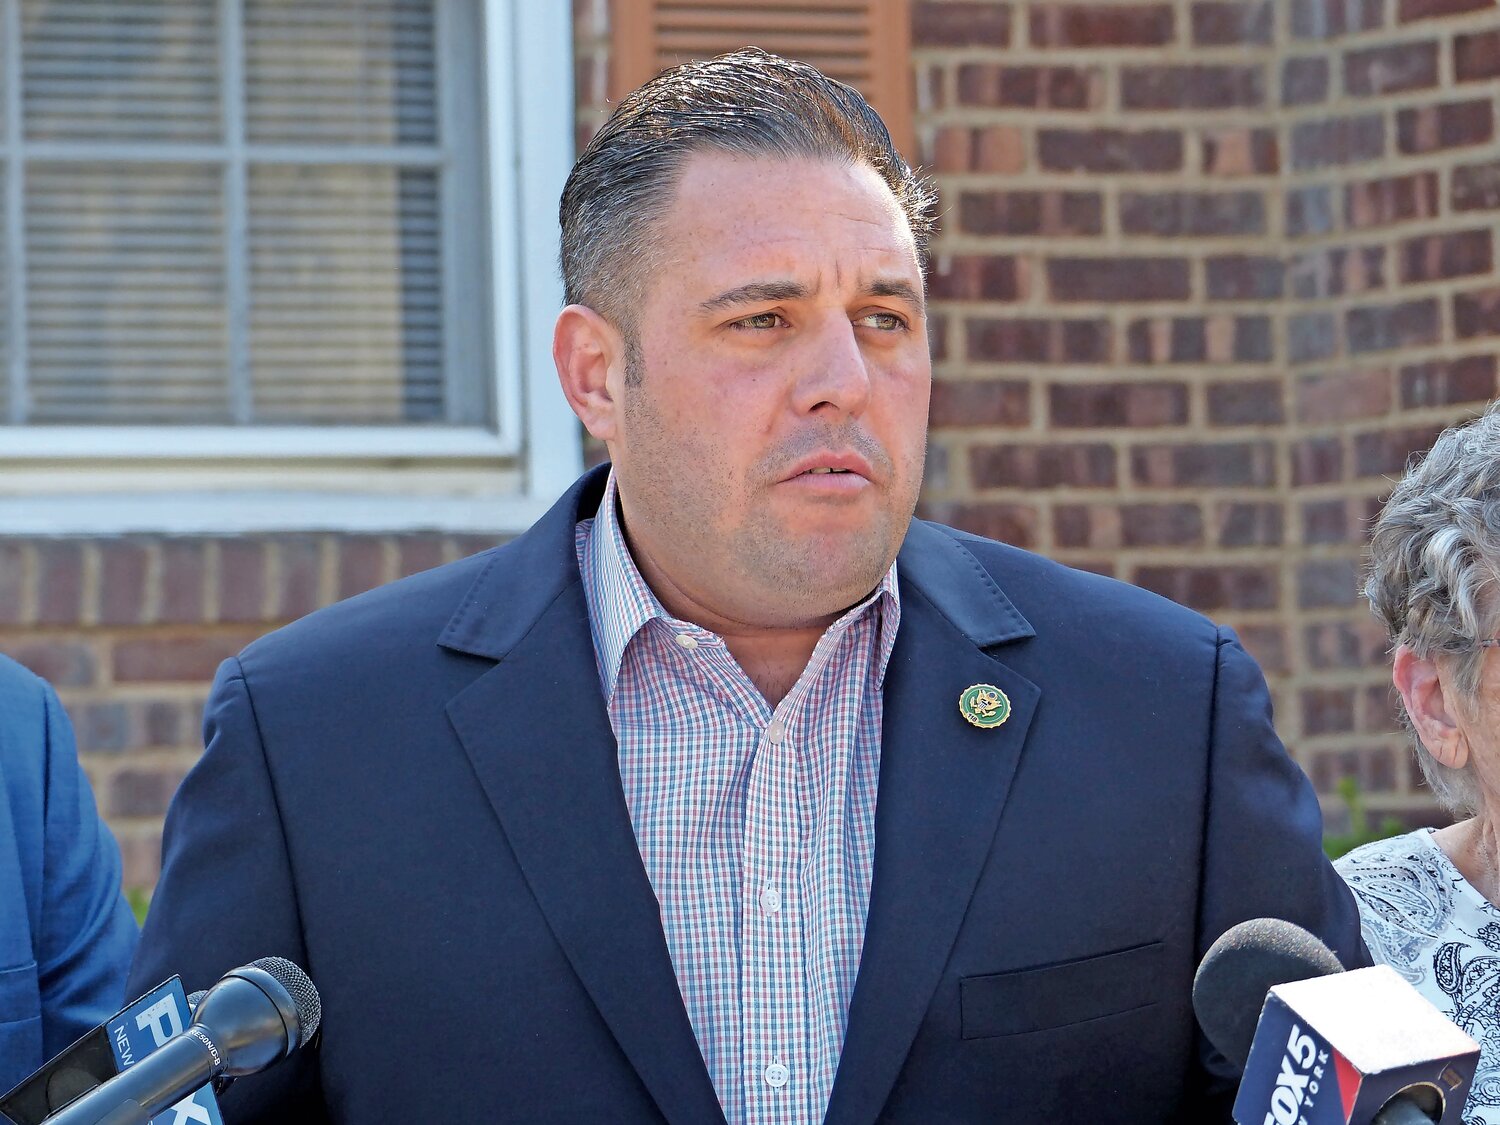 Rep. Anthony D’Esposito says the current SALT tax cap has devastated his constituents in the Fourth Congressional District.